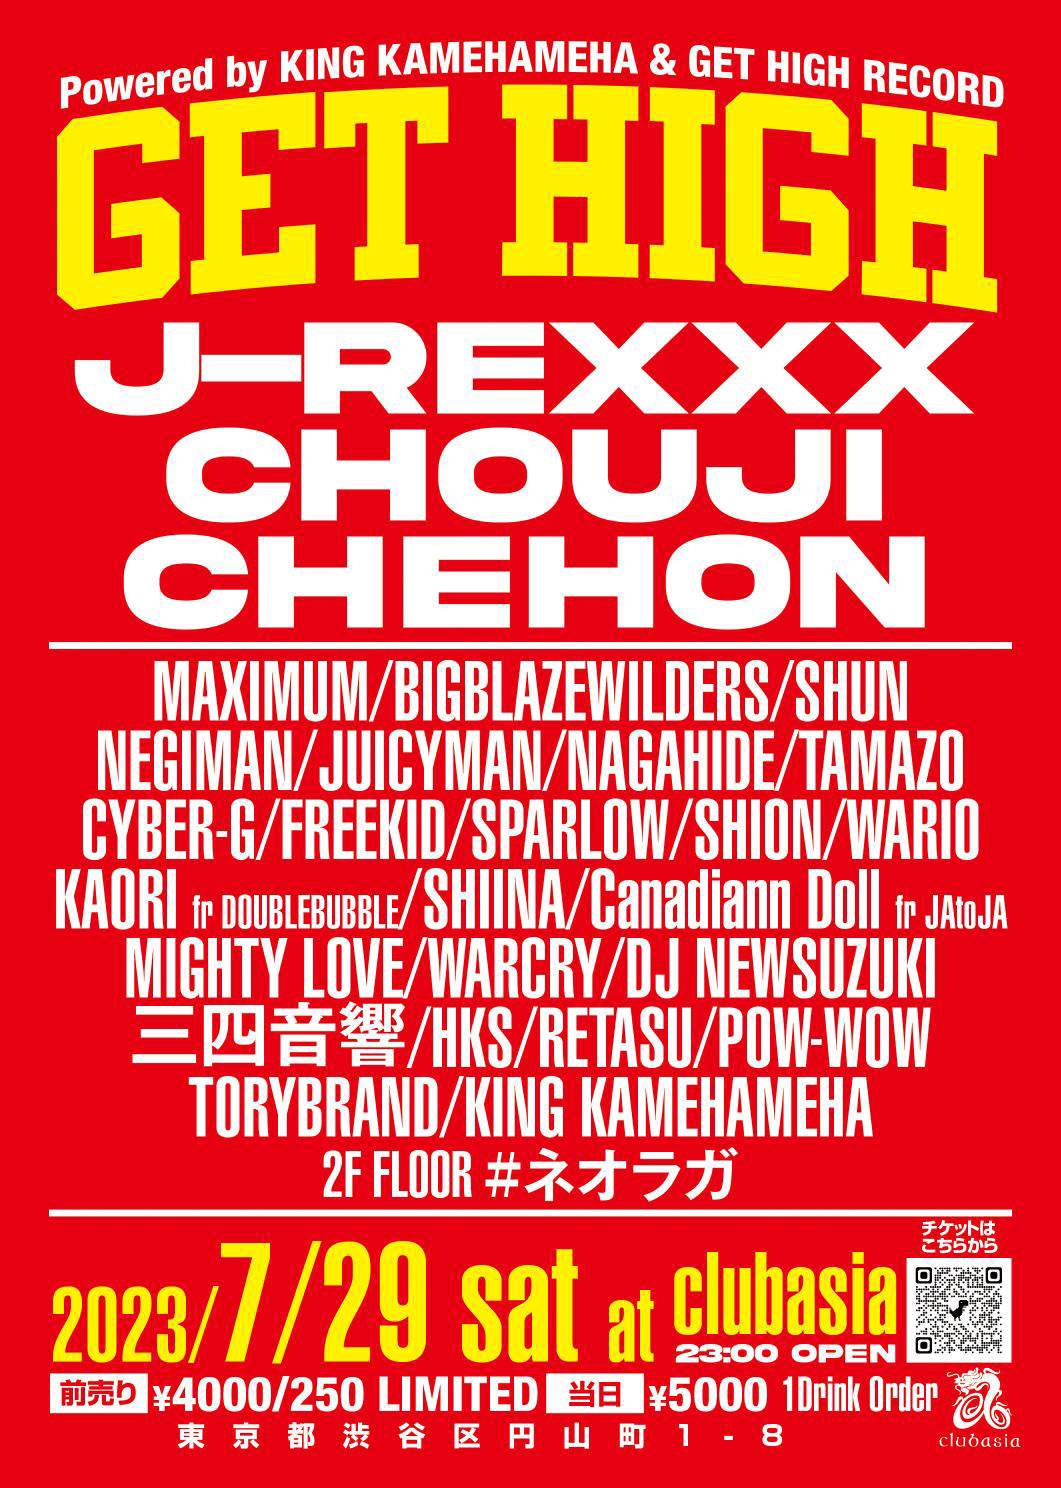 'GET HIGH' Powered by KING KAMEHAMEHA & GETHIGH RECORD - フライヤー表